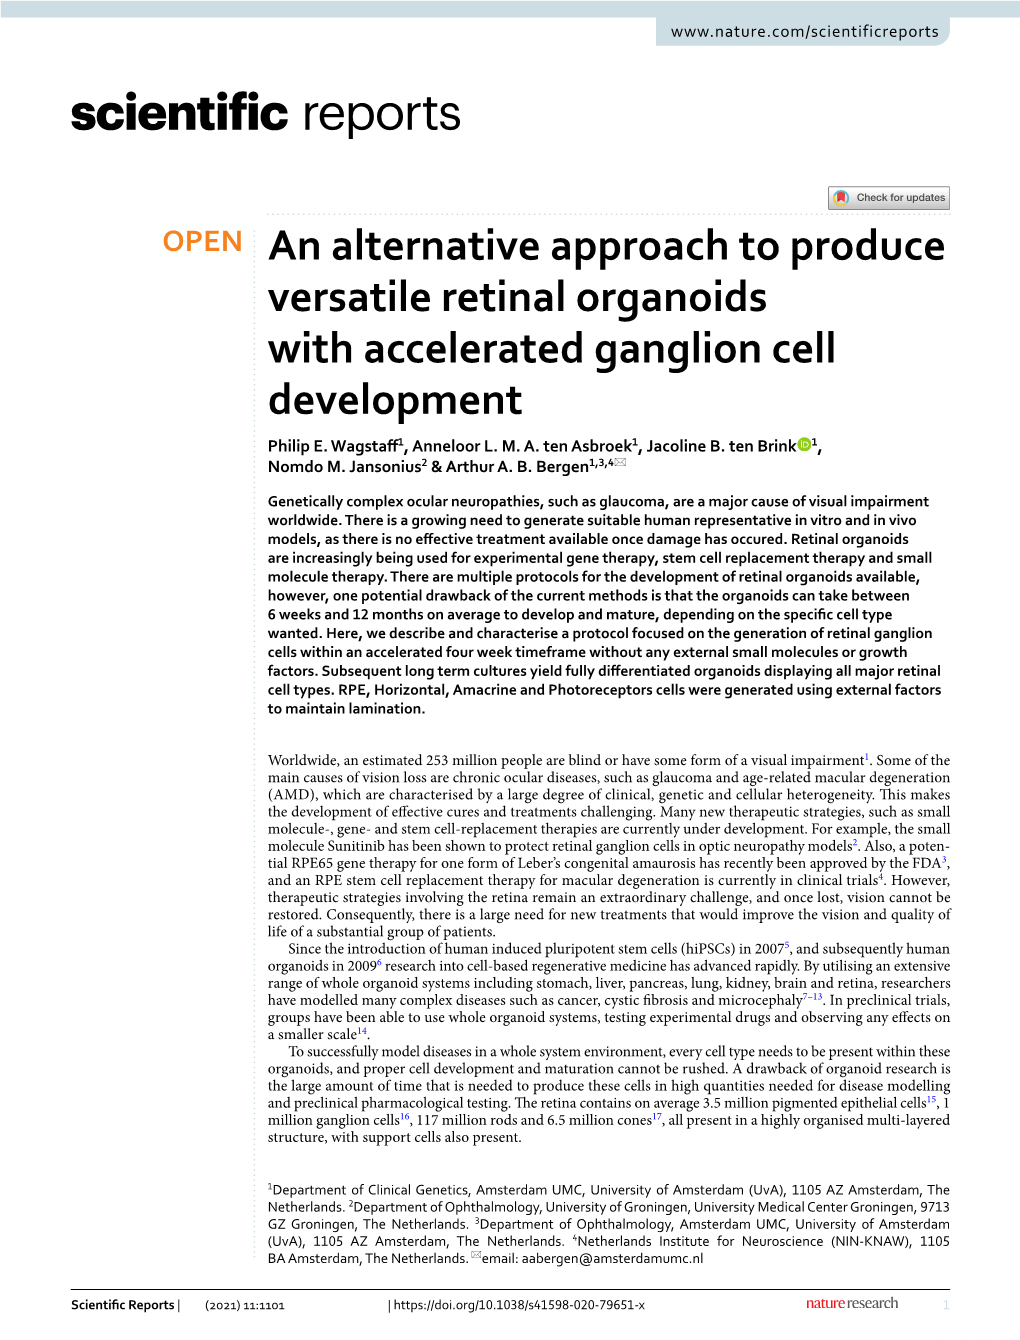 An Alternative Approach to Produce Versatile Retinal Organoids with Accelerated Ganglion Cell Development Philip E